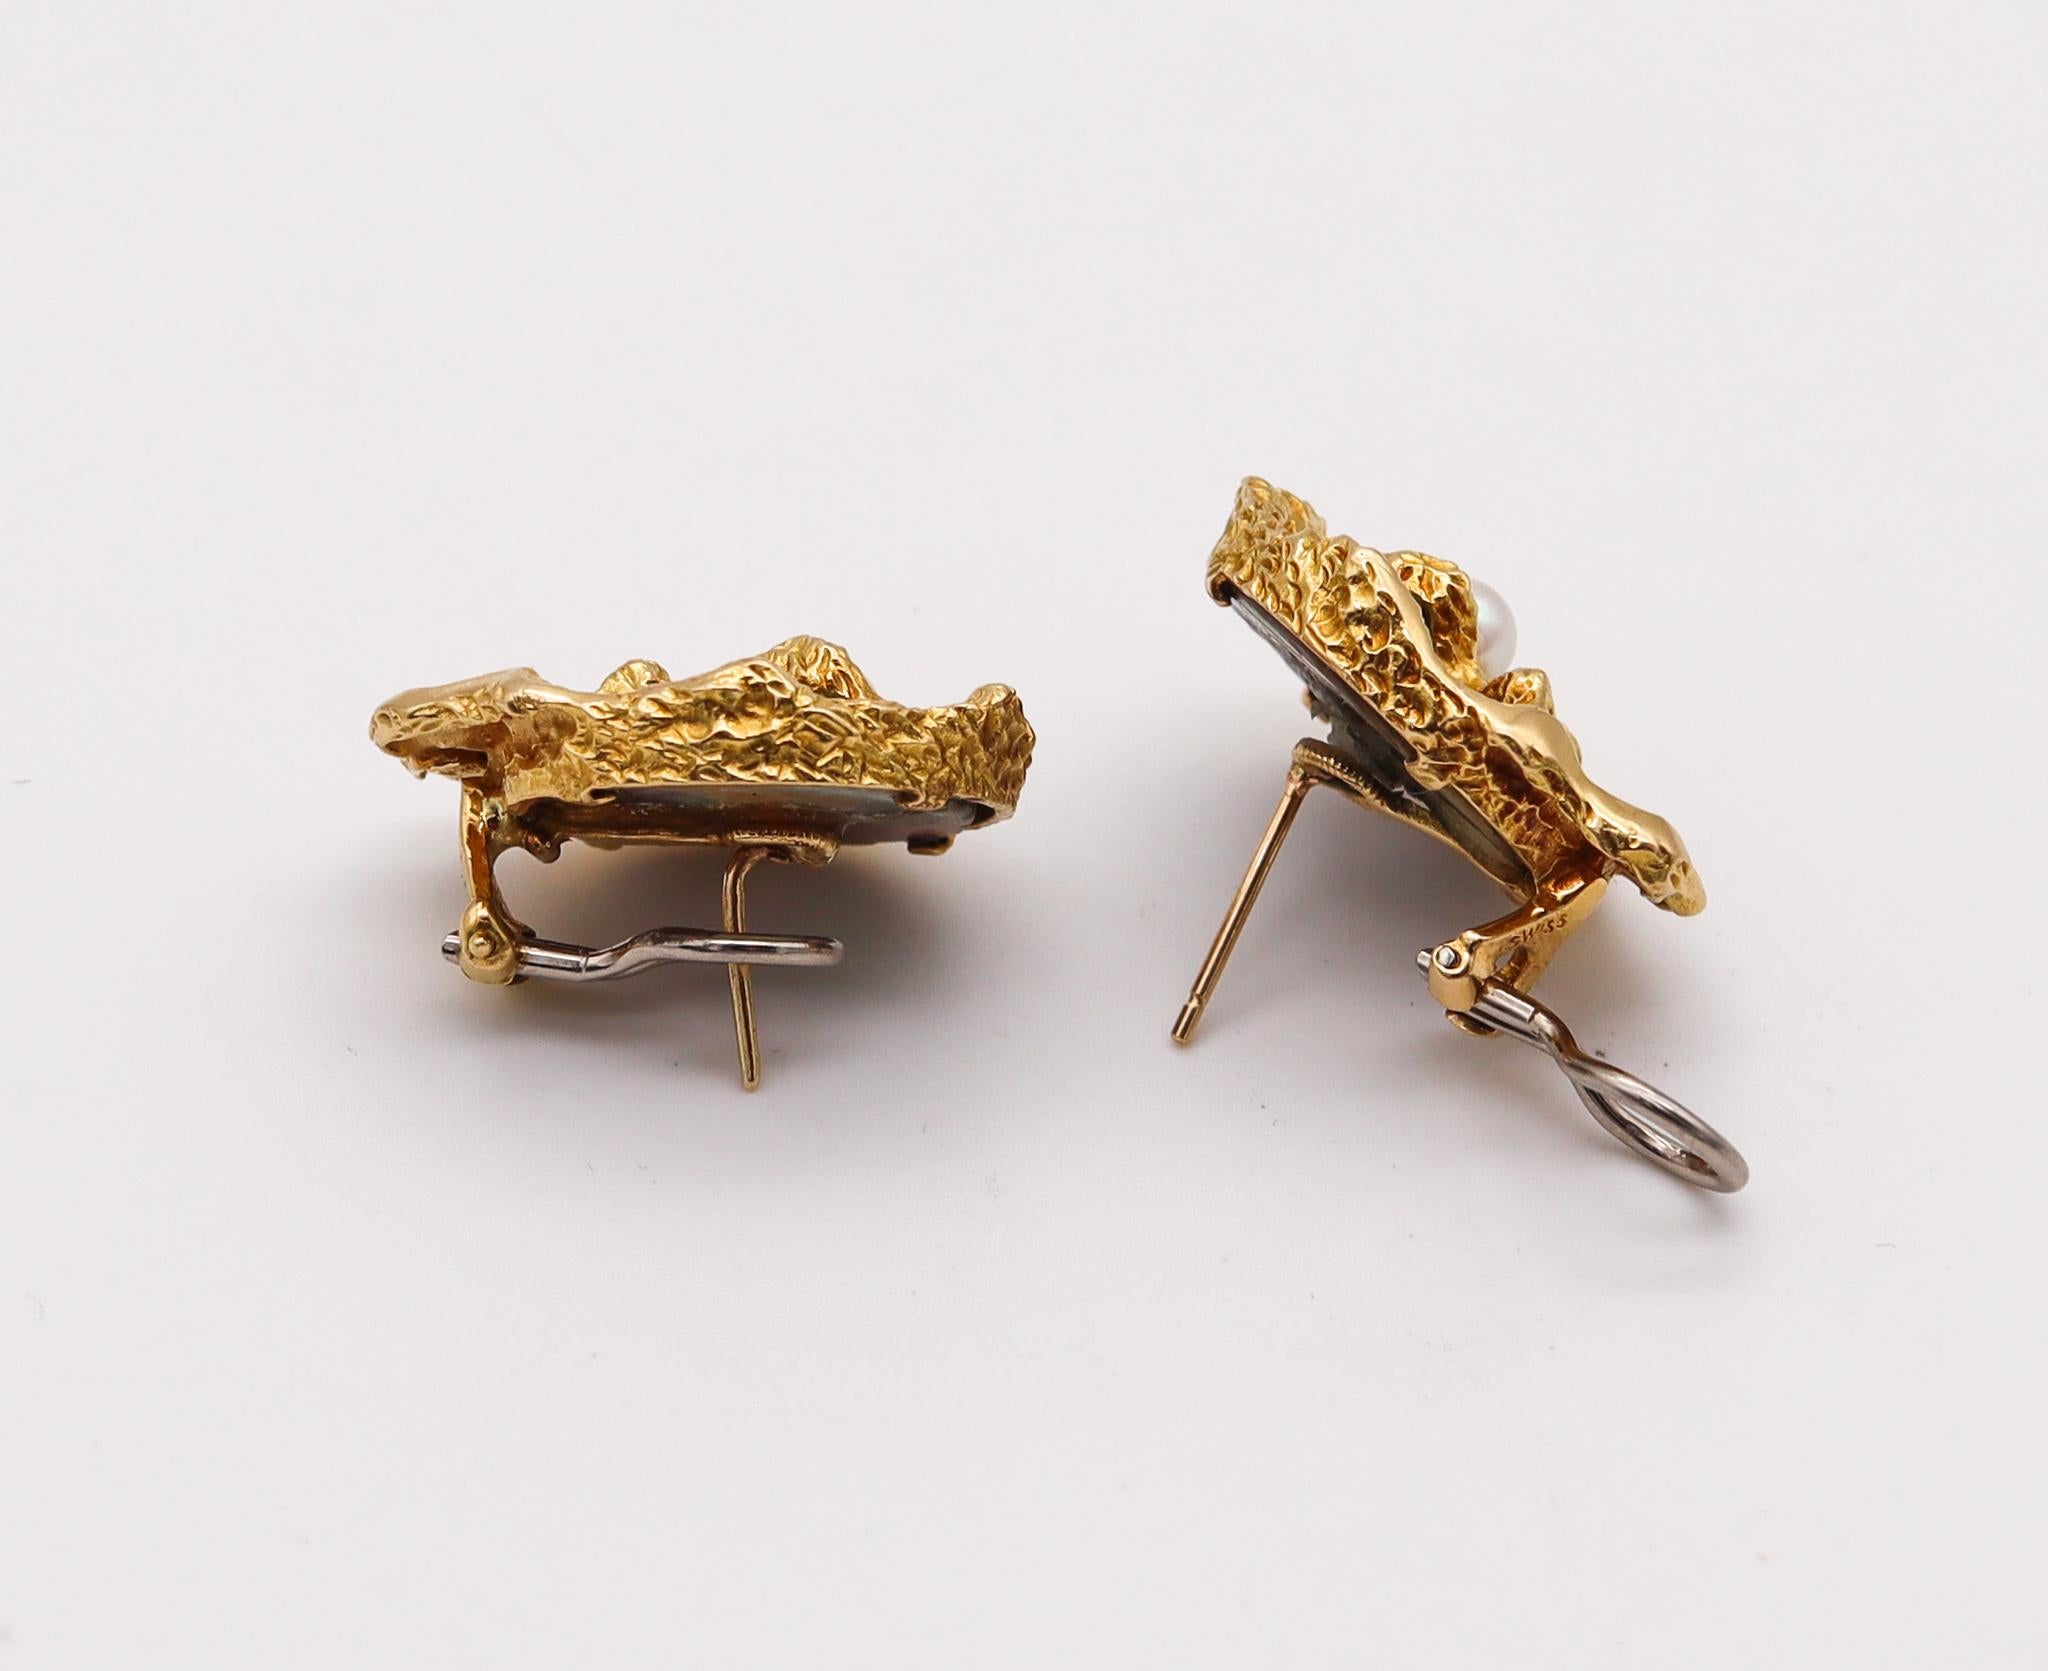 Modernist earrings designed by Gilbert Albert (1930-2919) for Gubelin.

Fabulous pair of earrings, from the modernism period circa 1960. This sculptural pieces was made in Zurich Switzerland by the genius goldsmith Gilbert Albert for the house of